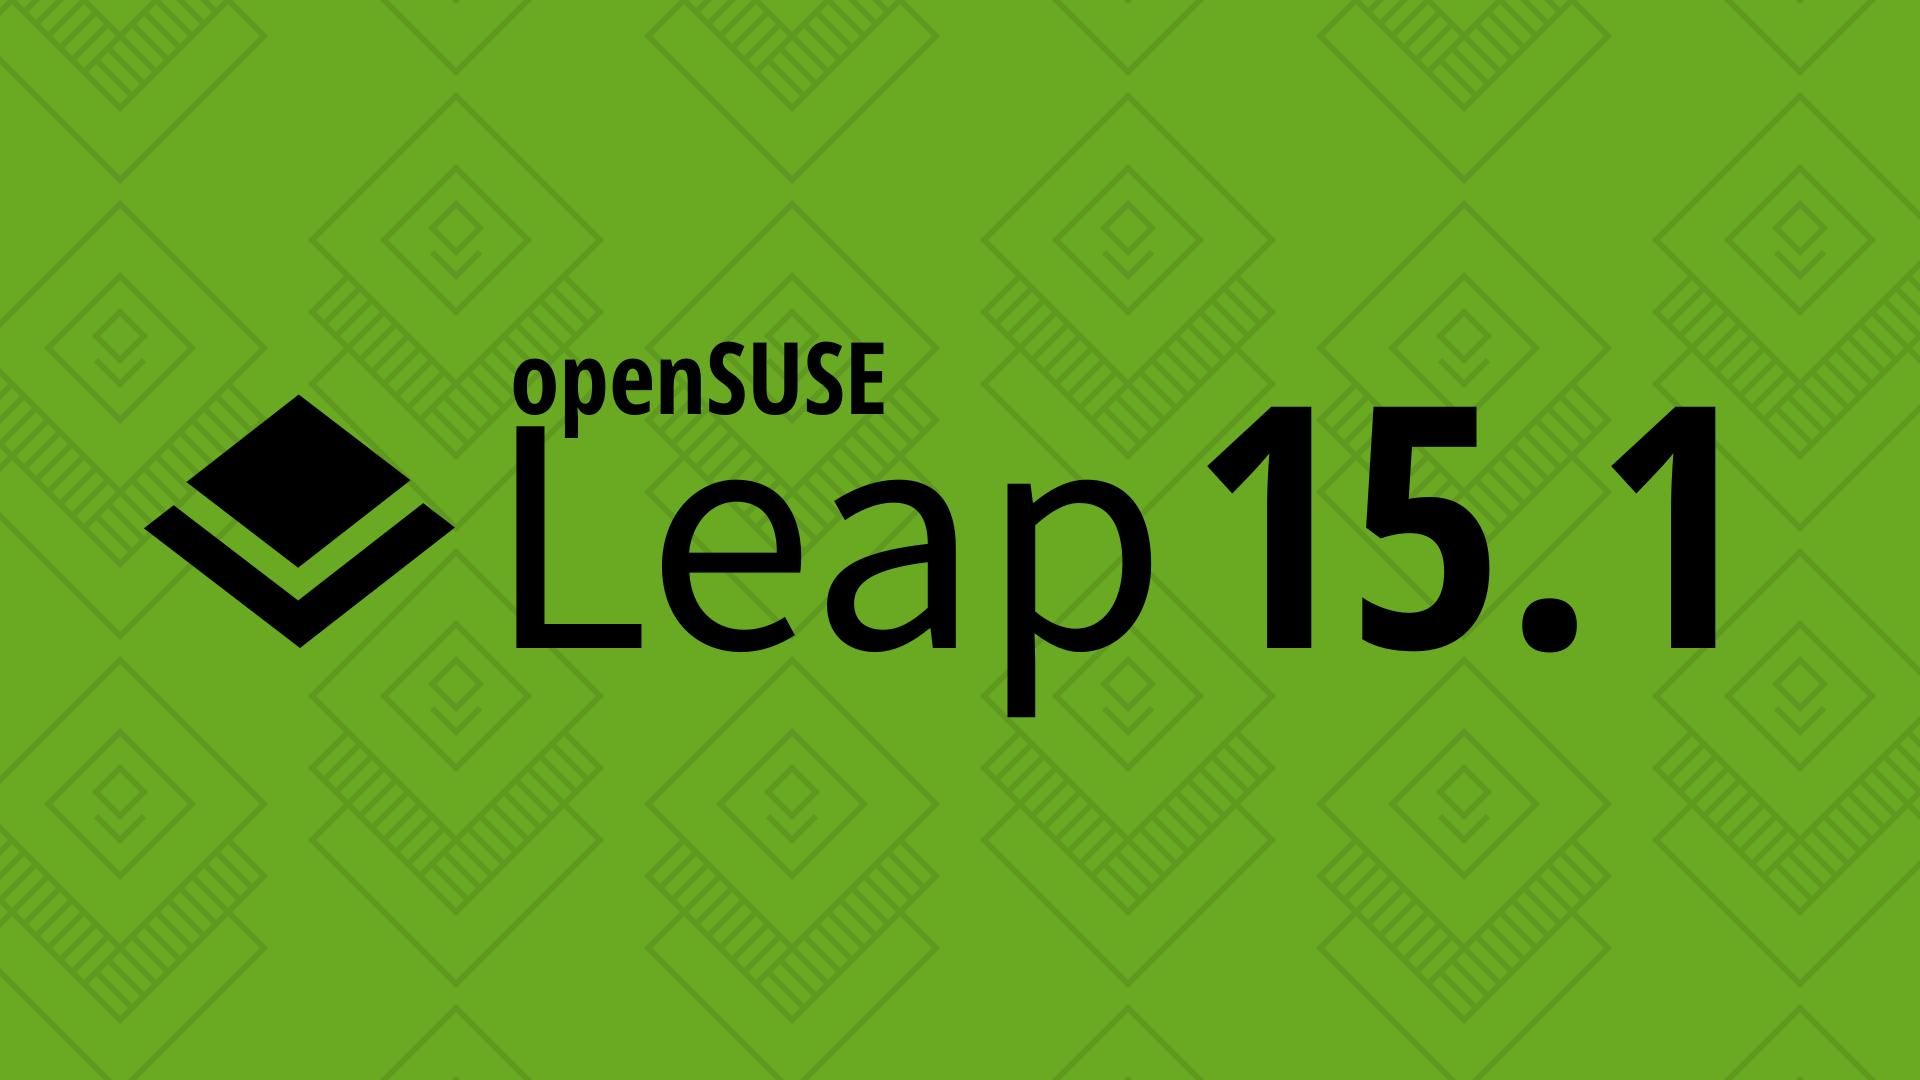 OpenSUSE Leap15.1 に再度変更